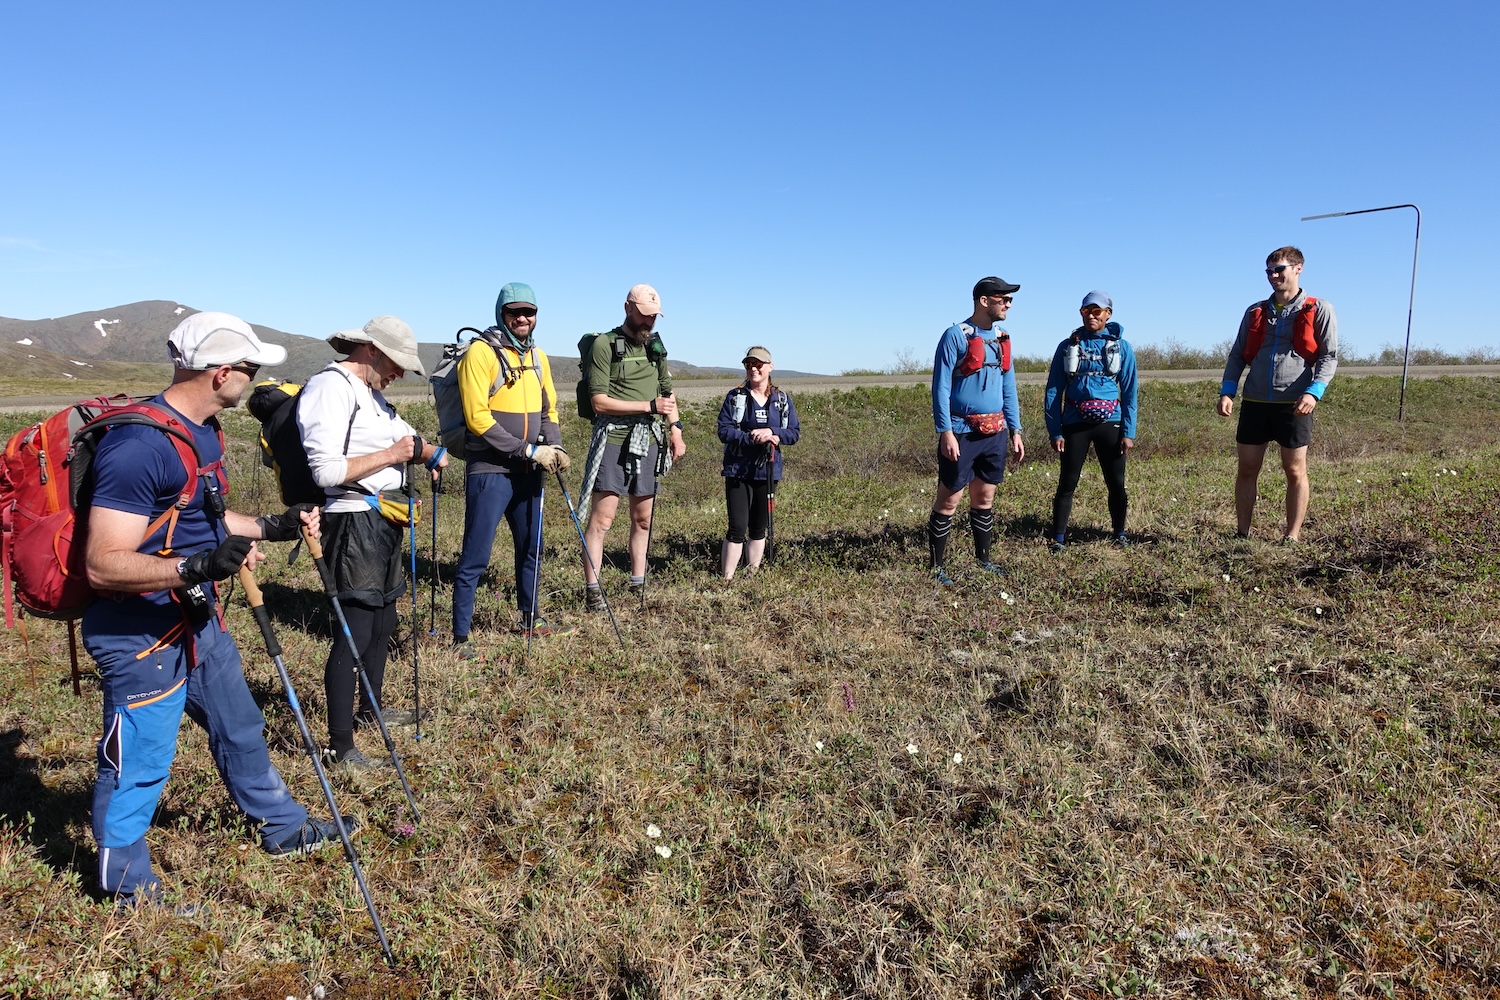 Eight people in hiking gear stand on tundra under a blue sky.